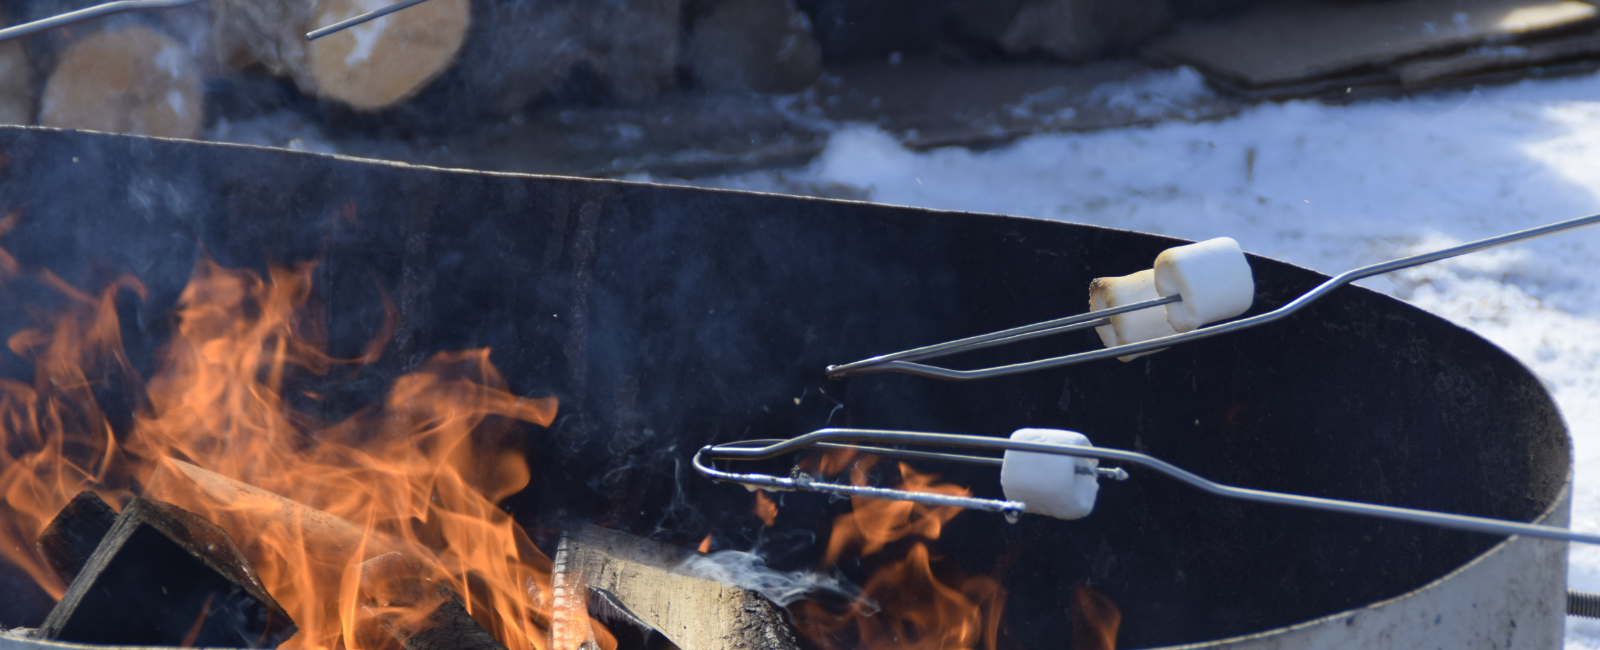 Cooking marshmallows over a fire.